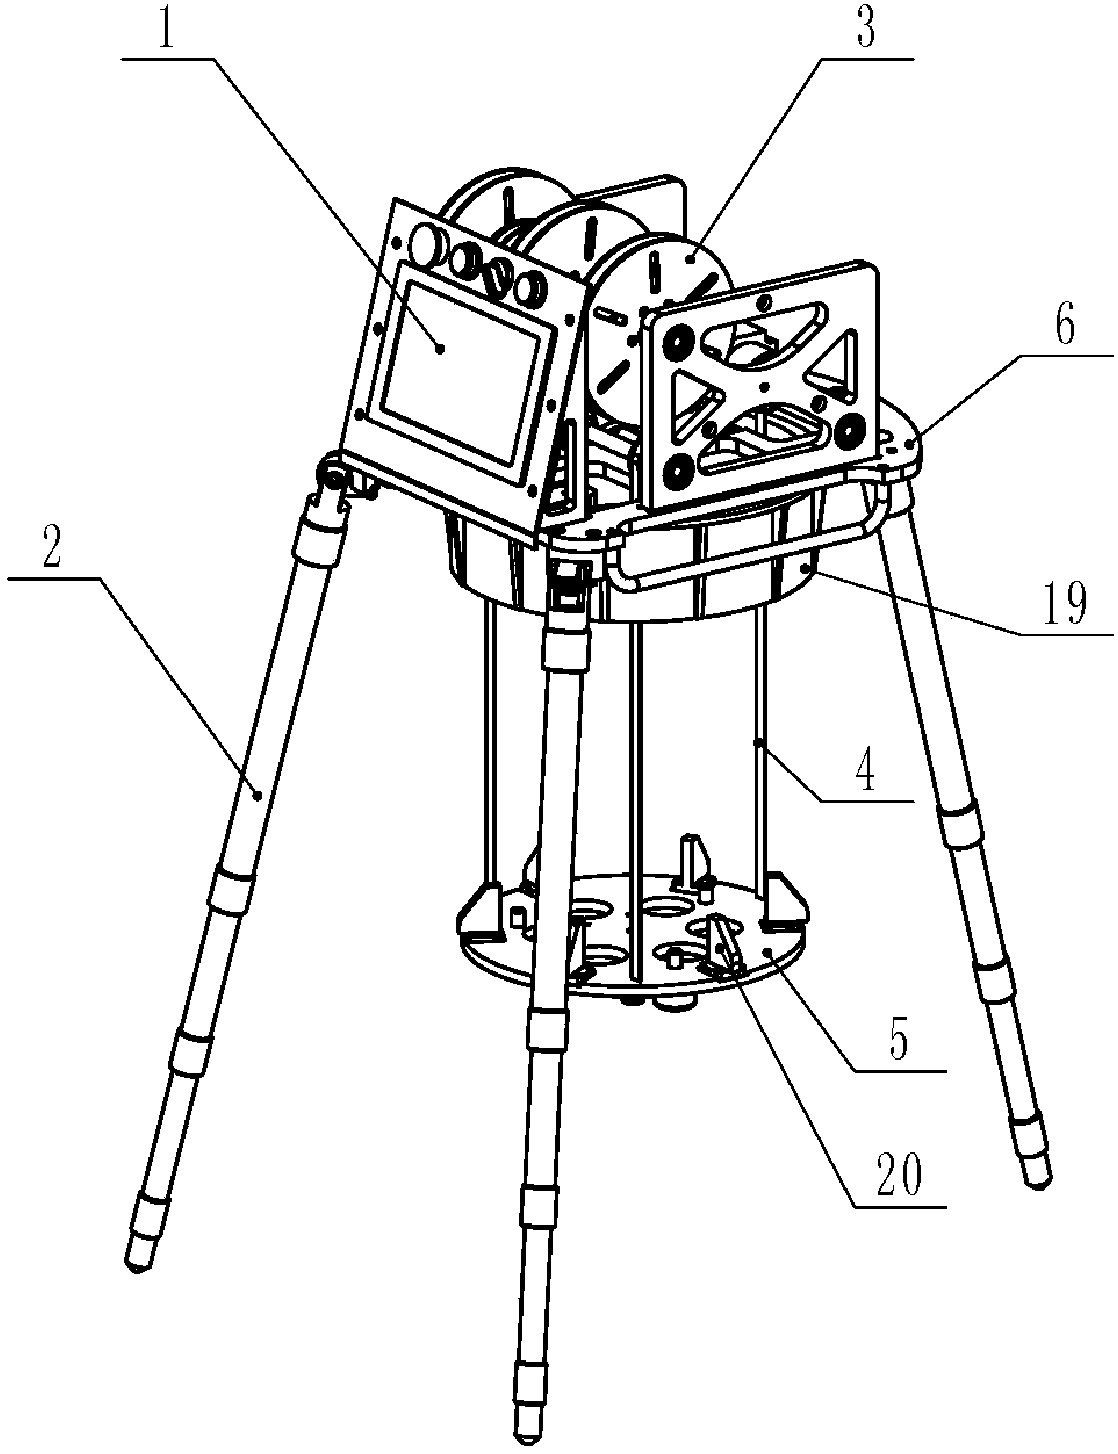 A three-point lifting device for underground detection